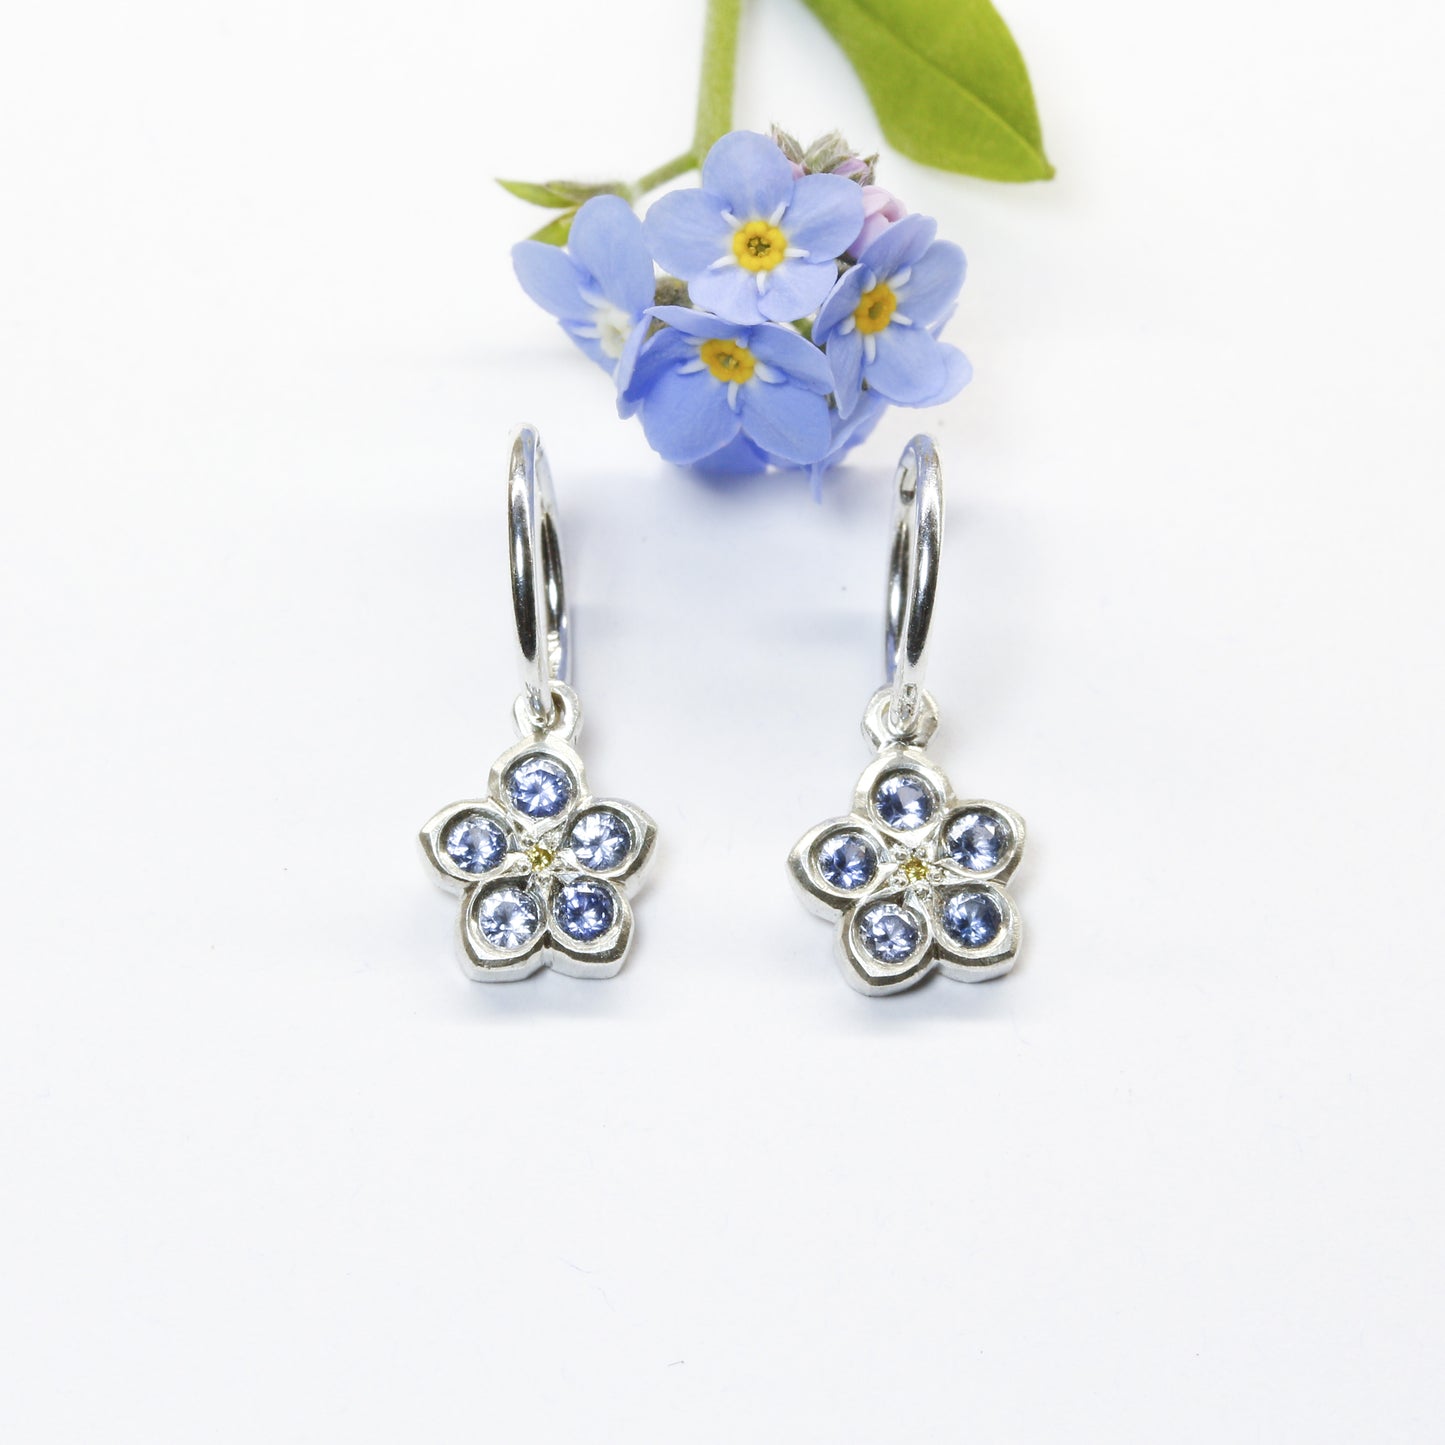 Forget me not sapphire and yellow diamond earrings